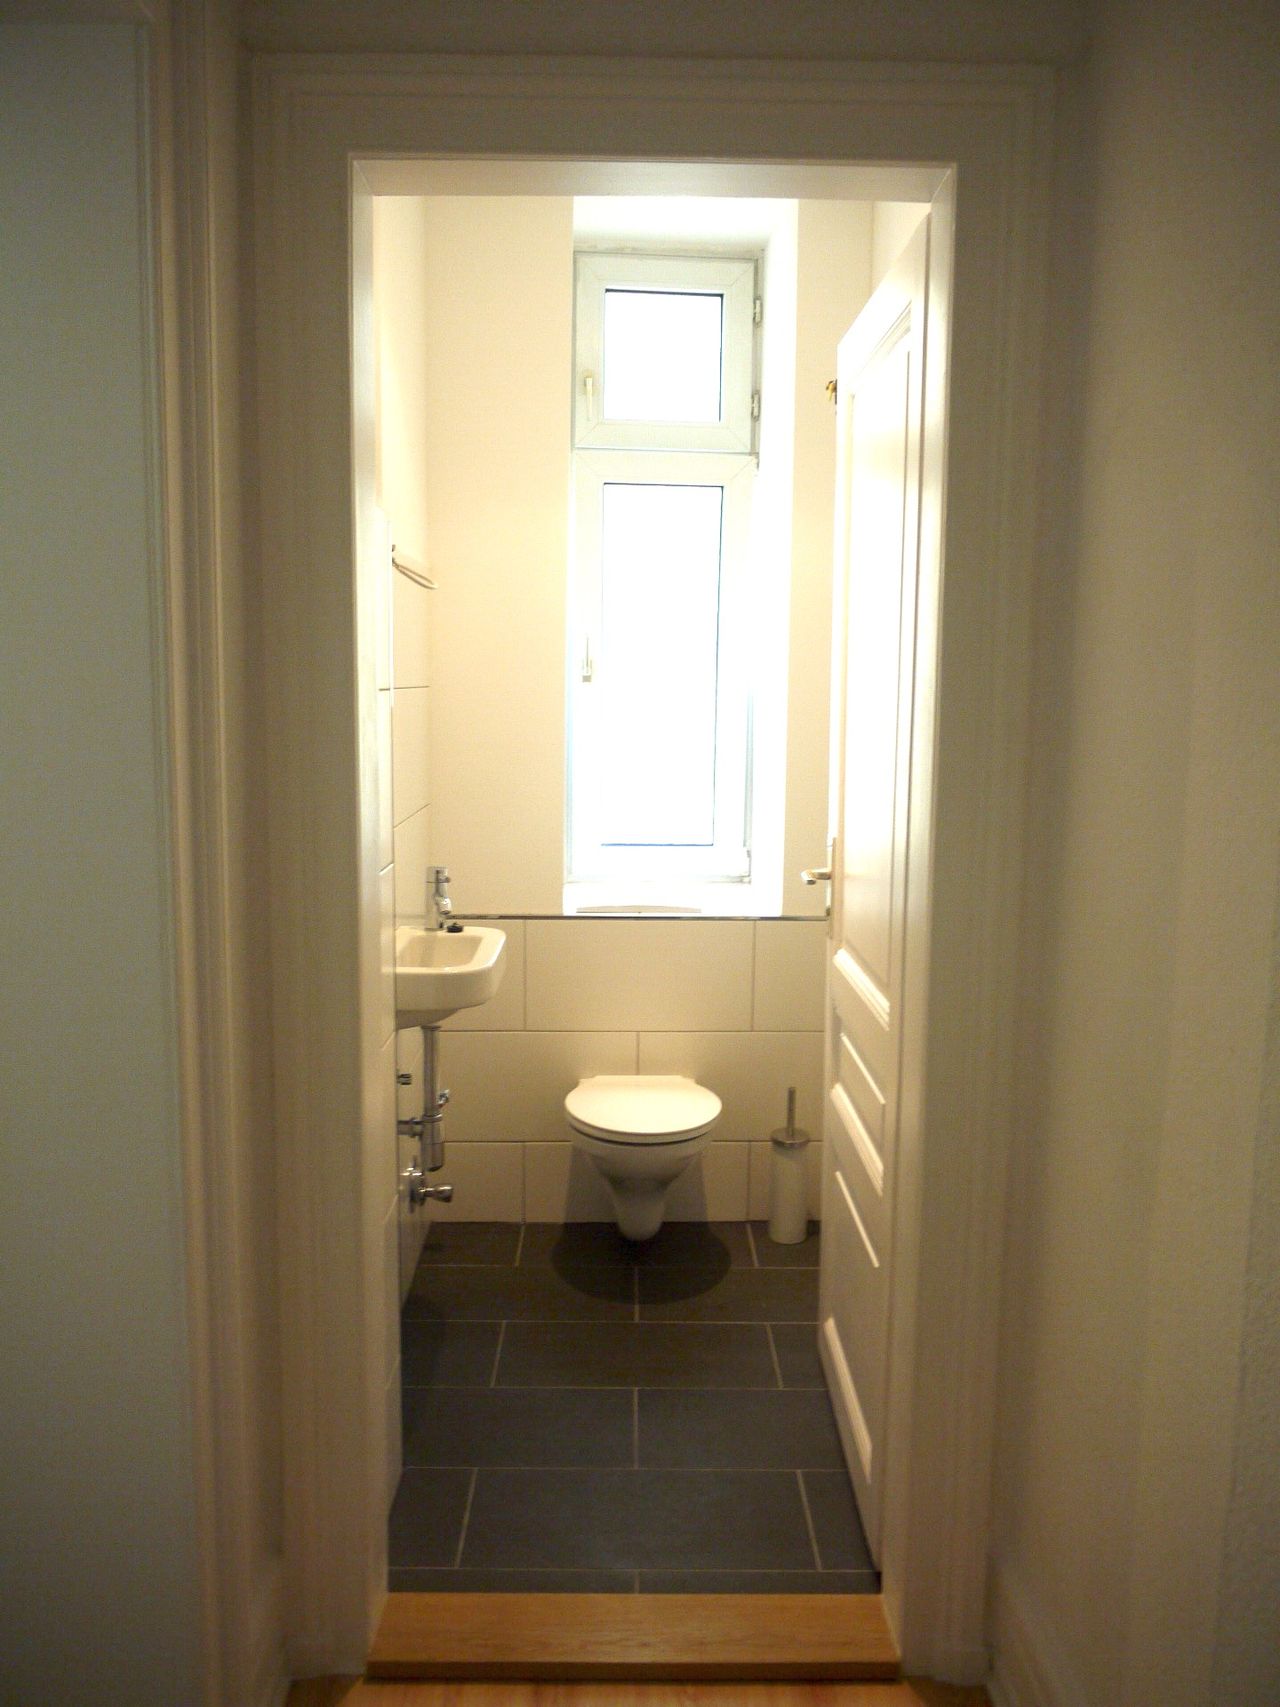 Stylish flat turn-of-the century house in noble Westend 3 Rooms Balcony Guest-WC 76 sqm 1 km to City Center and Fair